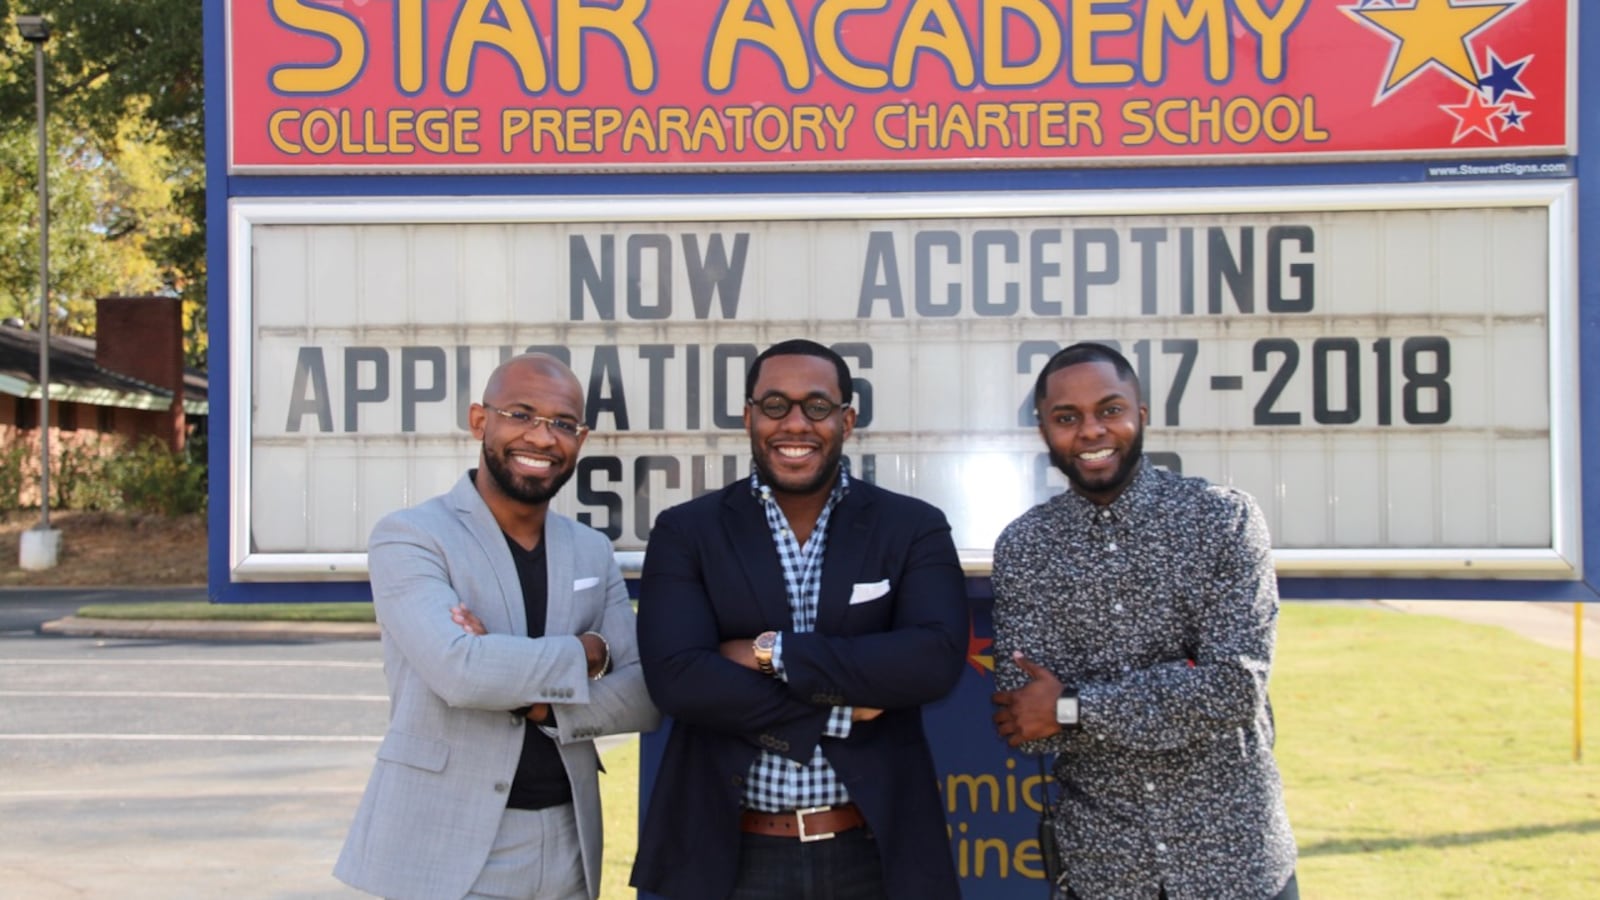 From left: Robert Harvey, Edward Stephens and James Johnson make up the new leadership team of STAR Academy Charter School in Memphis.